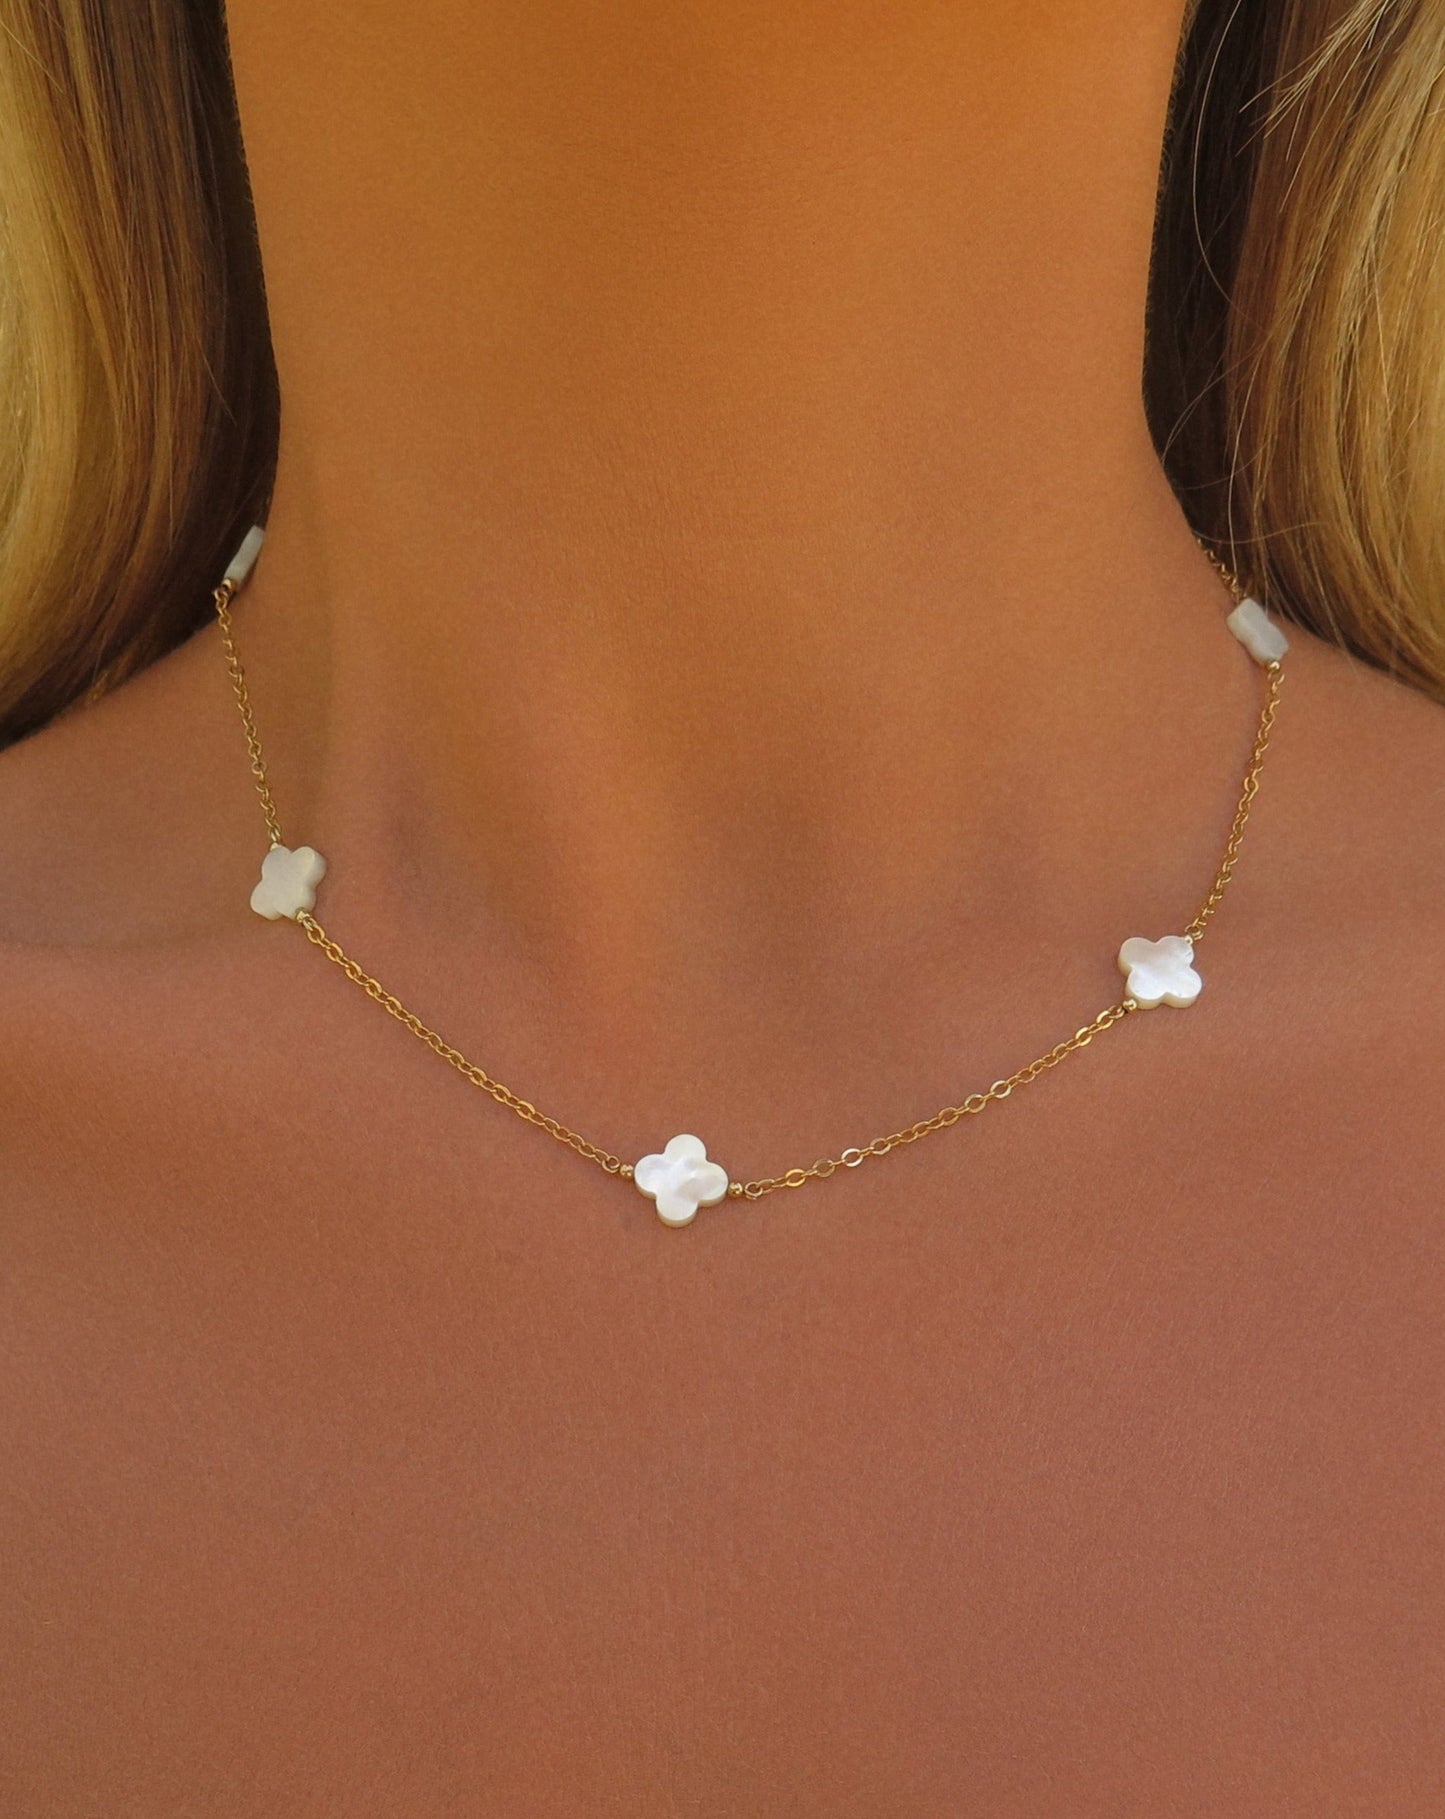 Five White Clover Necklace